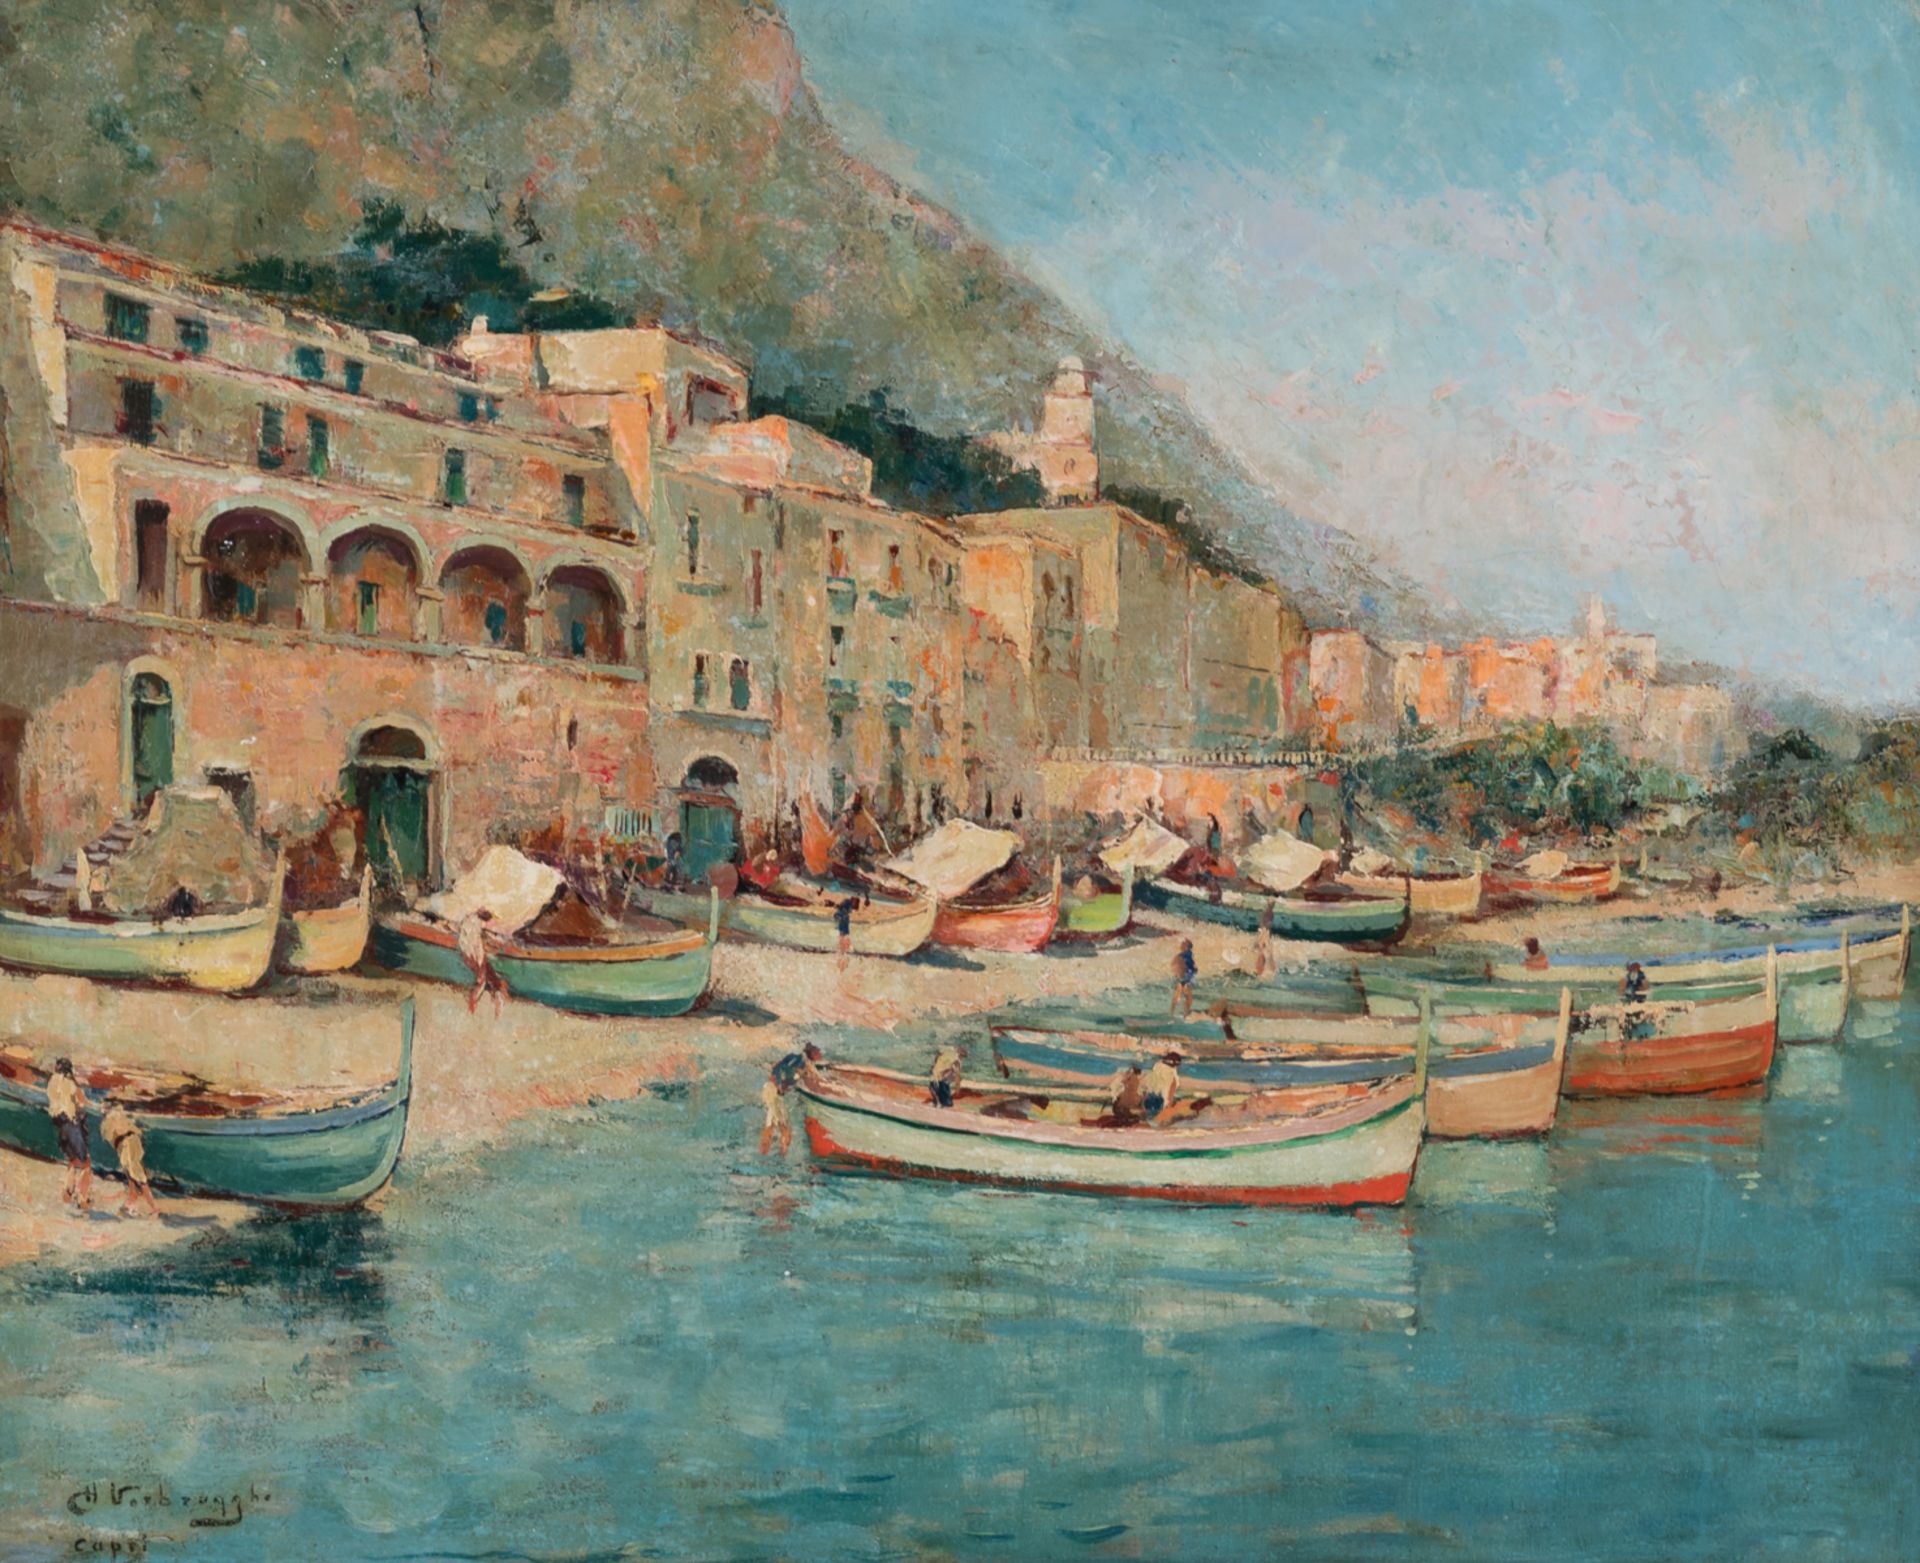 Verbrugghe Ch., 'Capri', oil on canvas, 50,5 x 61 cm Is possibly subject of the SABAM legislation /